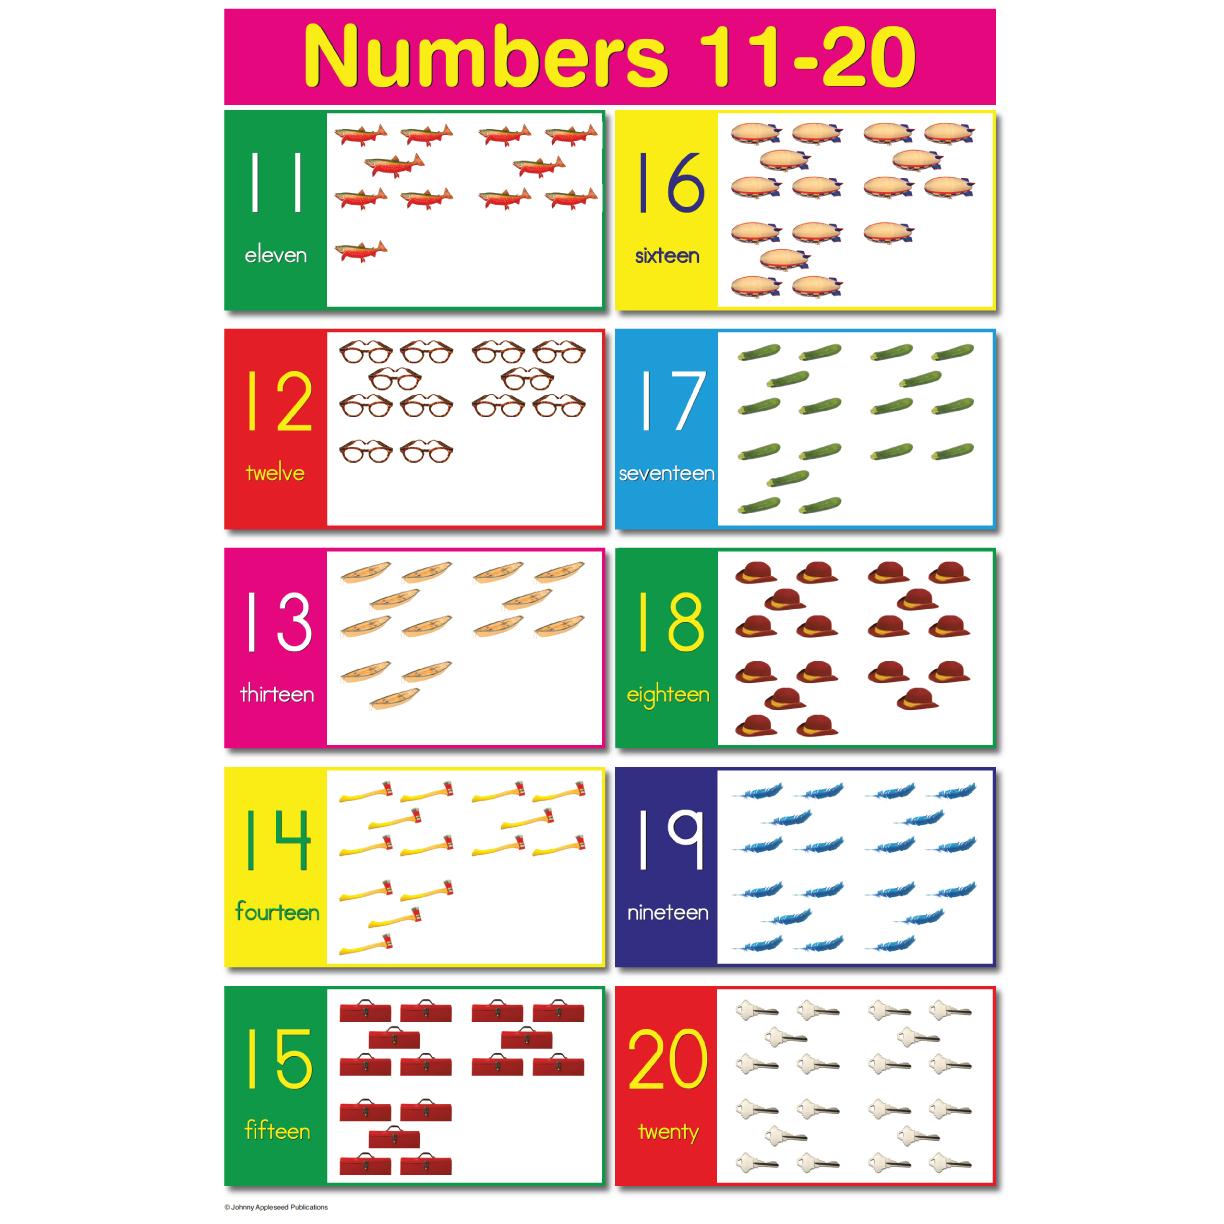 Numbers 11 20 Educational Laminated Chart